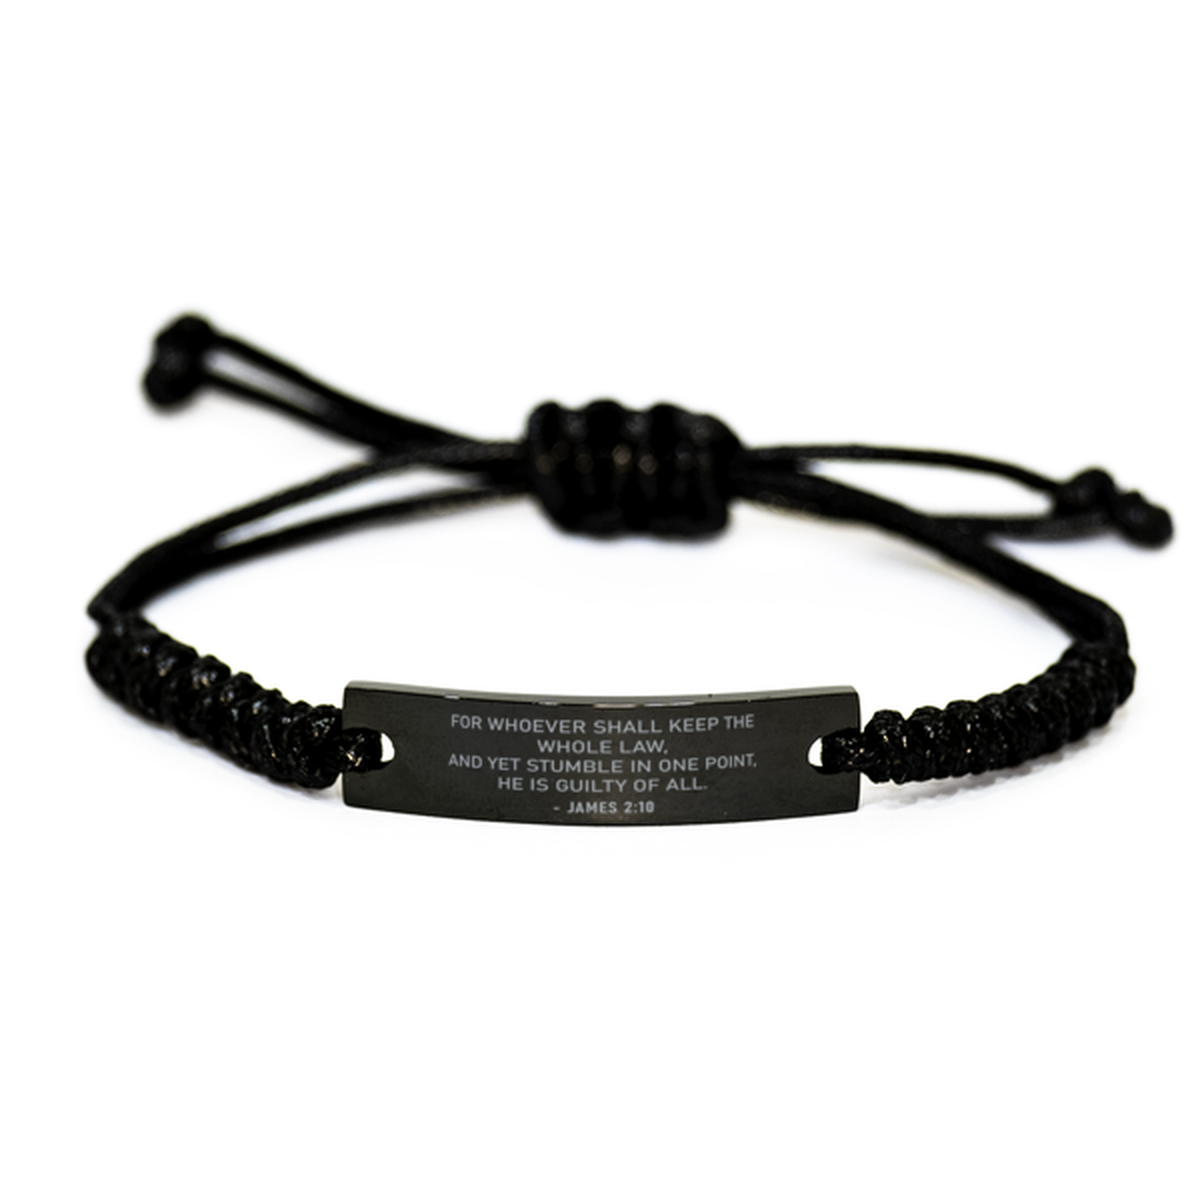 Bible Verse Rope Bracelet, James 2:10 For Whoever Shall Keep The Whole Law, And Yet, Christian Encouraging Gifts For Men Women Boys Girls